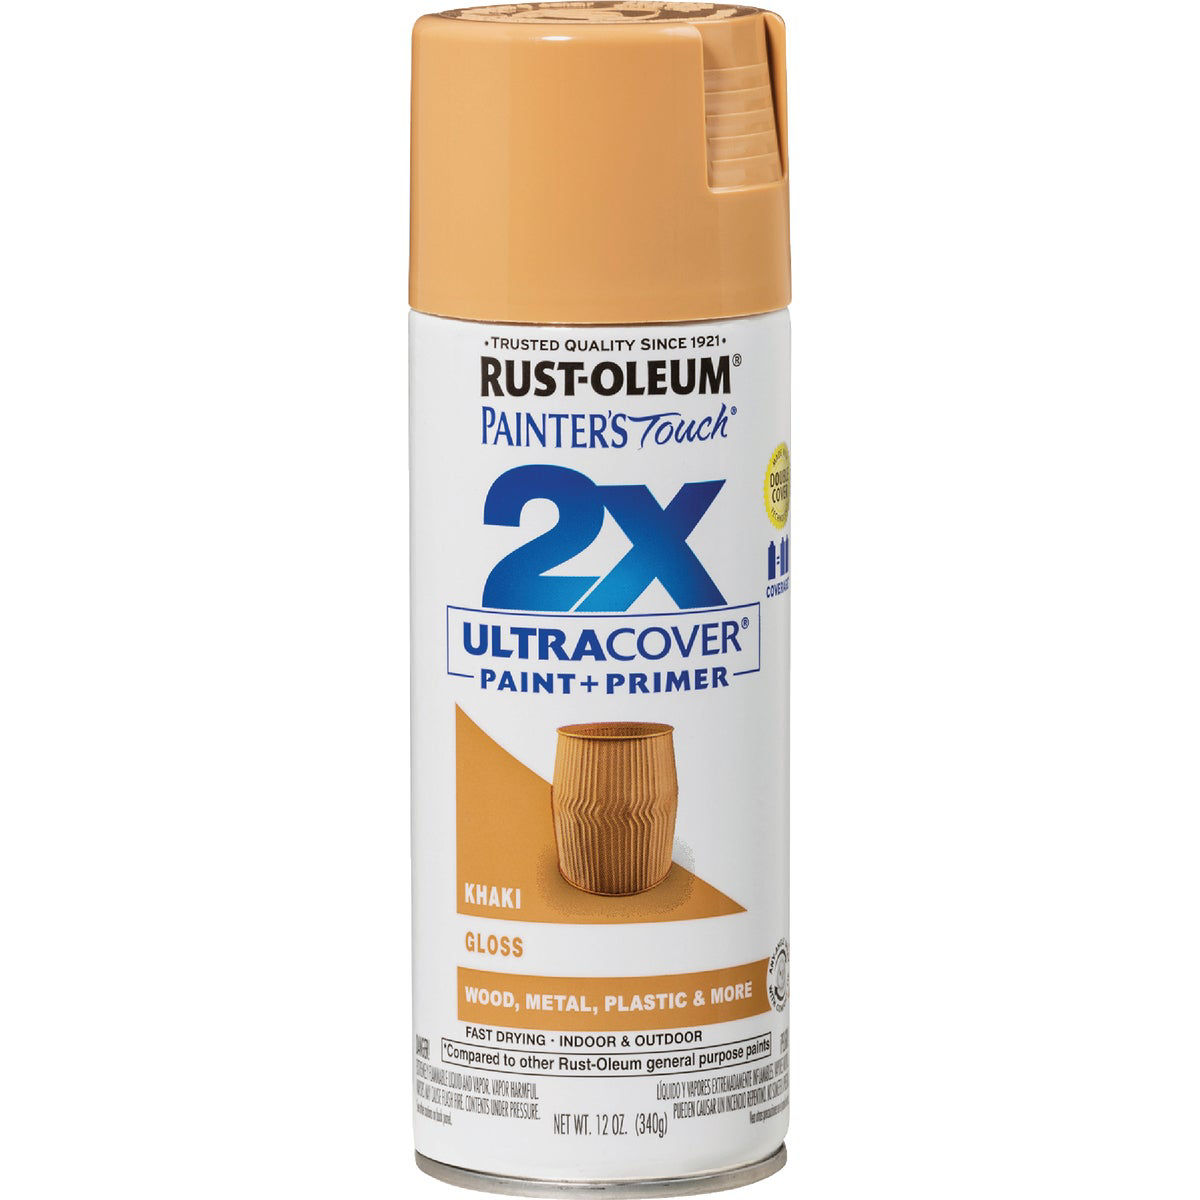 Greer's Do it Best Hardware - Rust-oleum's new Turbo spray paint made  painting this dresser easy! 5 minutes painting time, for each coat! Fast!!!